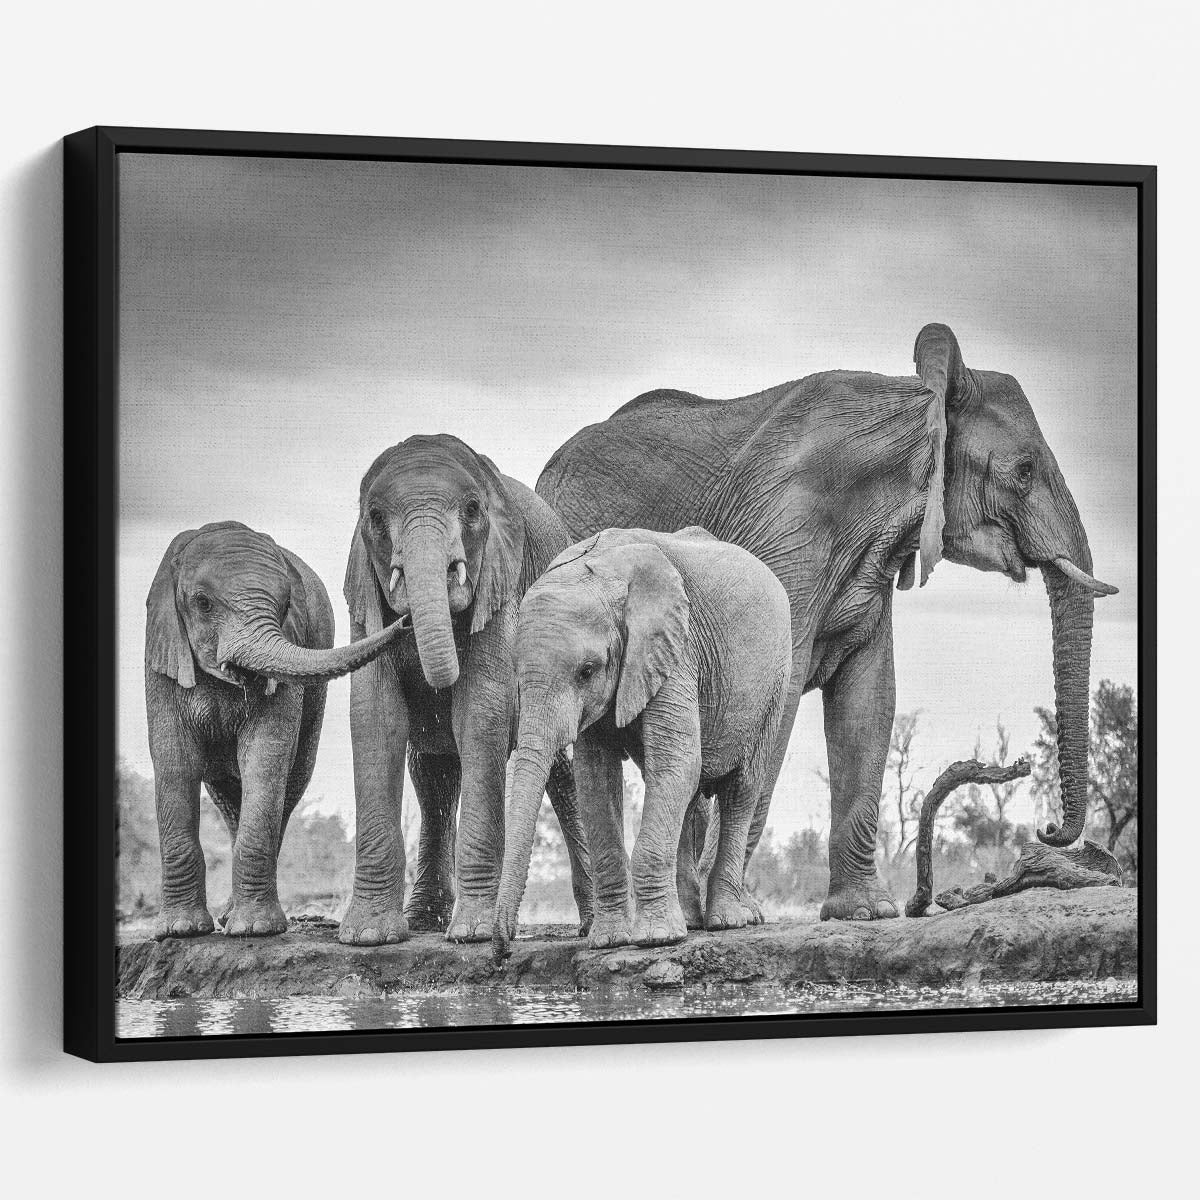 Majestic Elephant Family Gathering Wall Art in Monochrome by Luxuriance Designs. Made in USA.